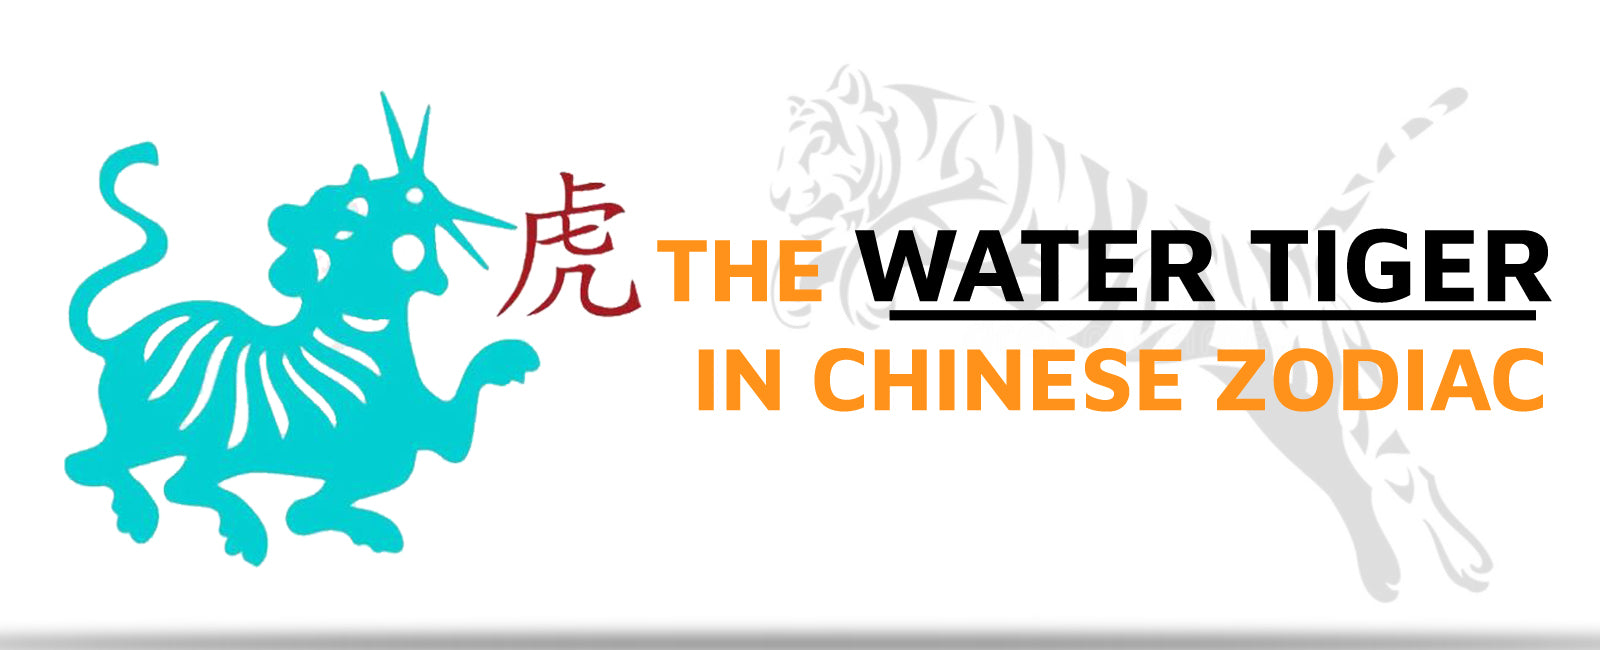 The Water Tiger in Chinese zodiac